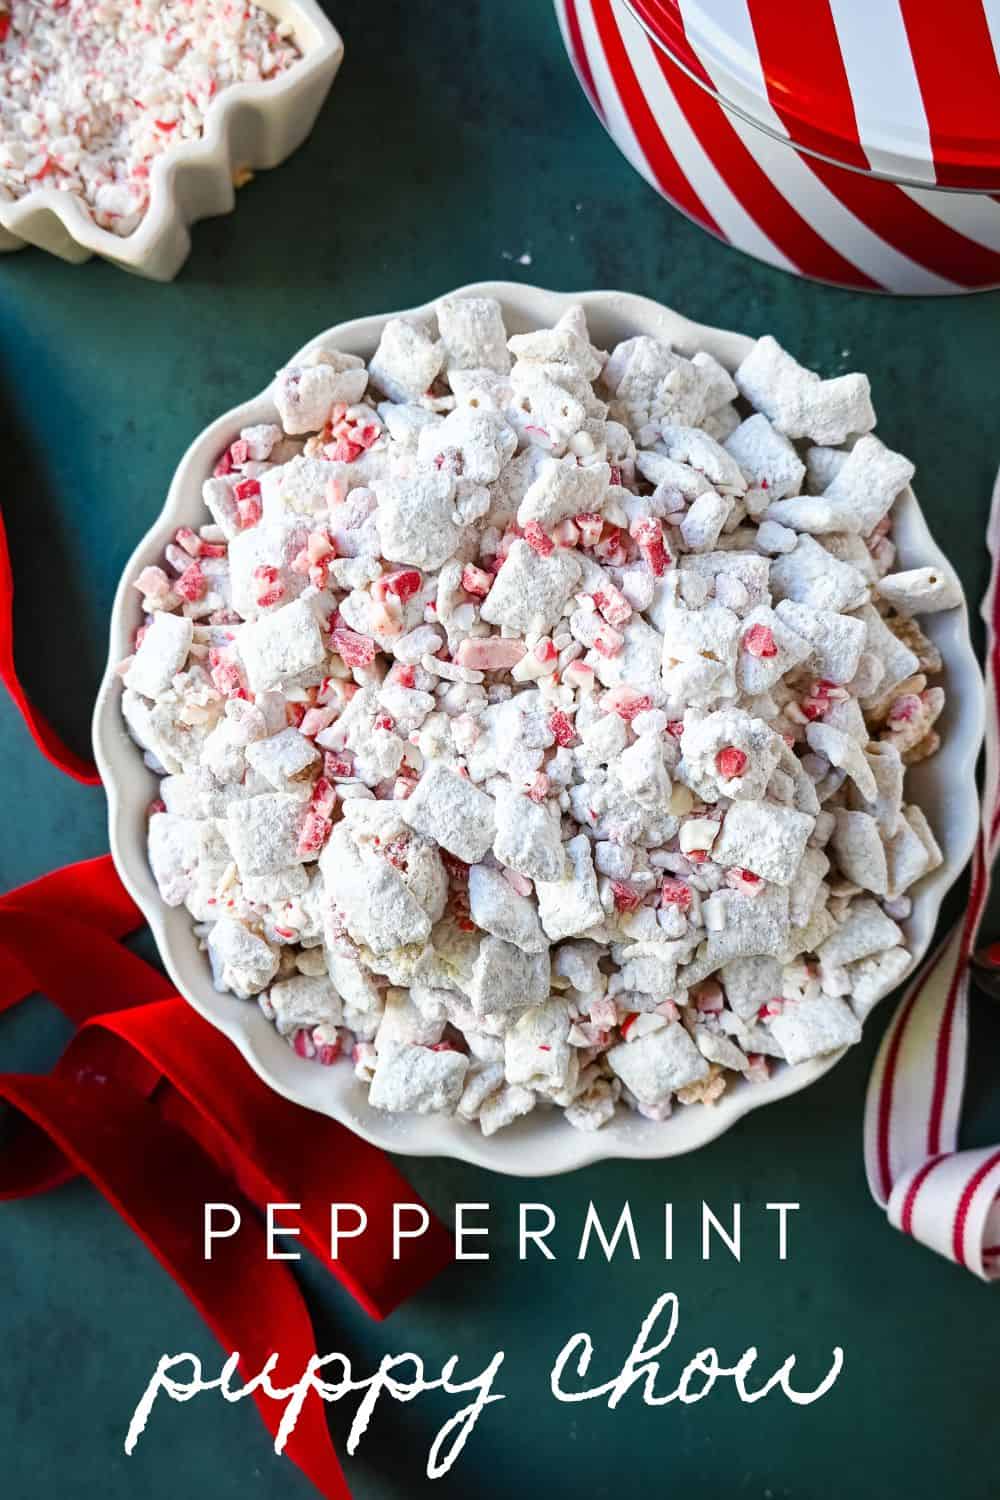 Peppermint Puppy Chow, also known as Peppermint Muddy Buddies, Peppermint Chex Mix, or Peppermint Bark Muddy Buddies, is a festive and addictive holiday treat. It is a variation of the classic Muddy Buddies, but is made with Rice Chex cereal, white chocolate, peppermint bark or candy canes, and powdered sugar. An easy Christmas treat recipe.